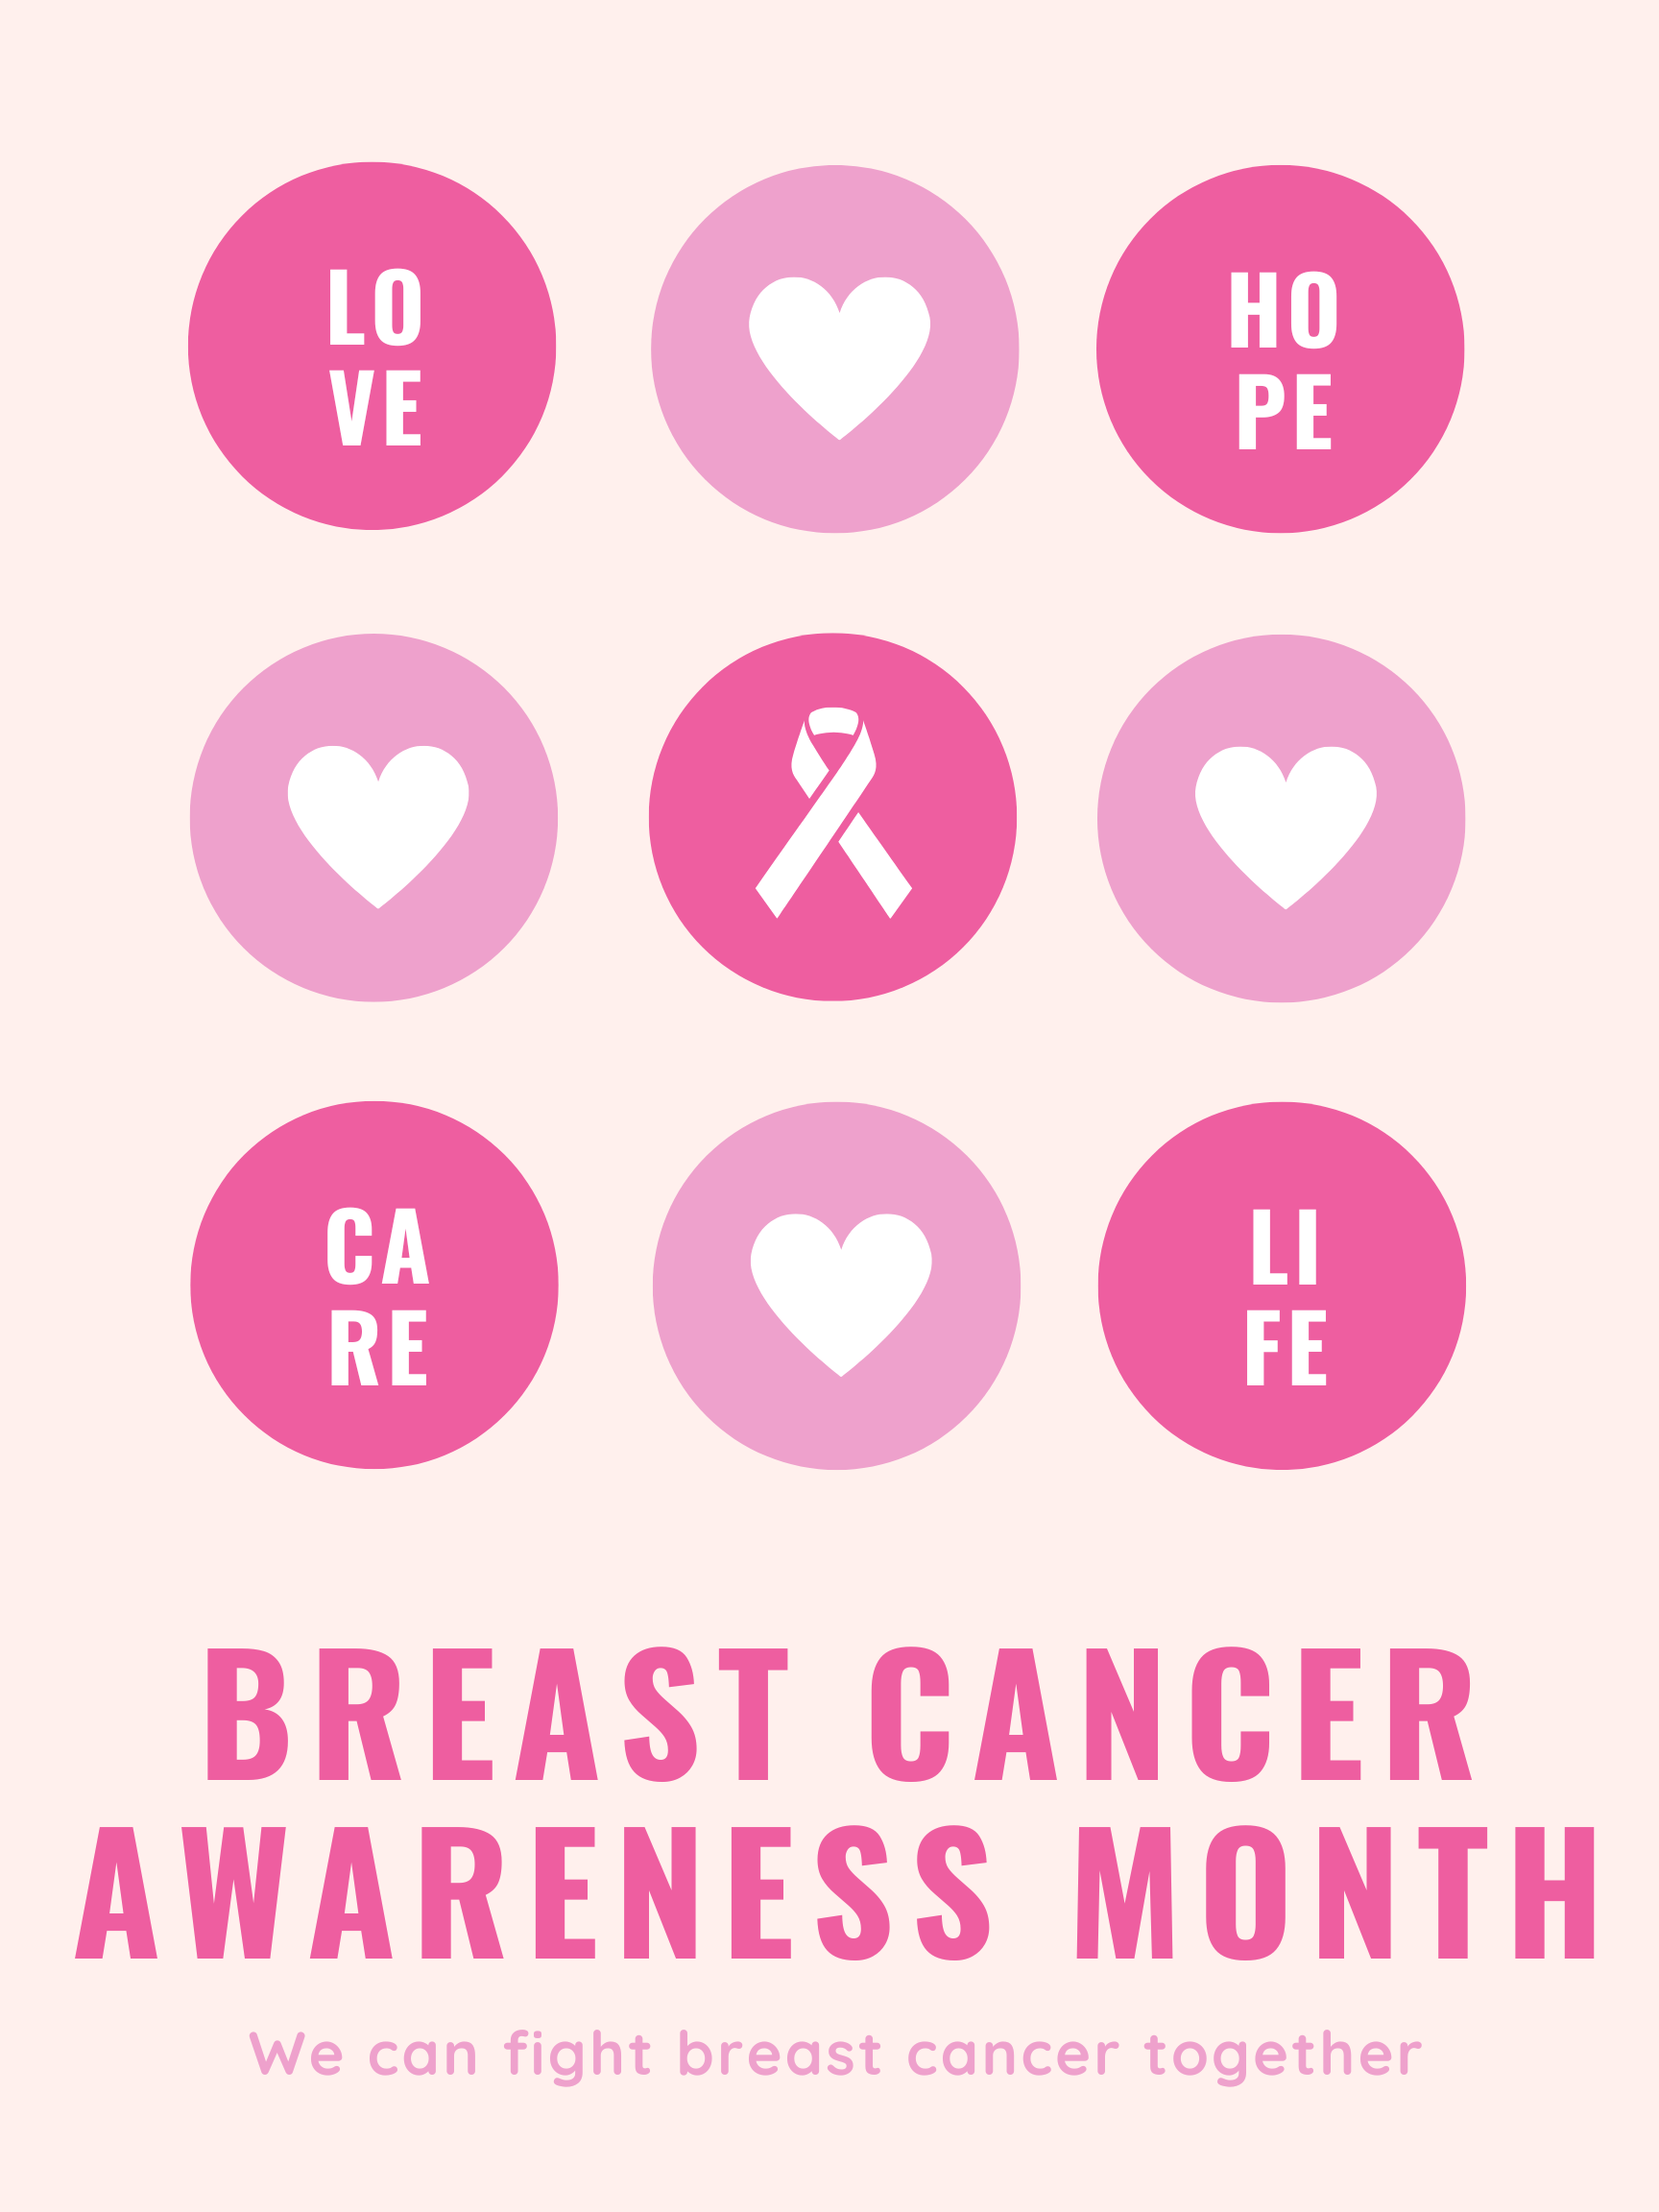 Breast Cancer Awareness Graphic, Icons of ribbons